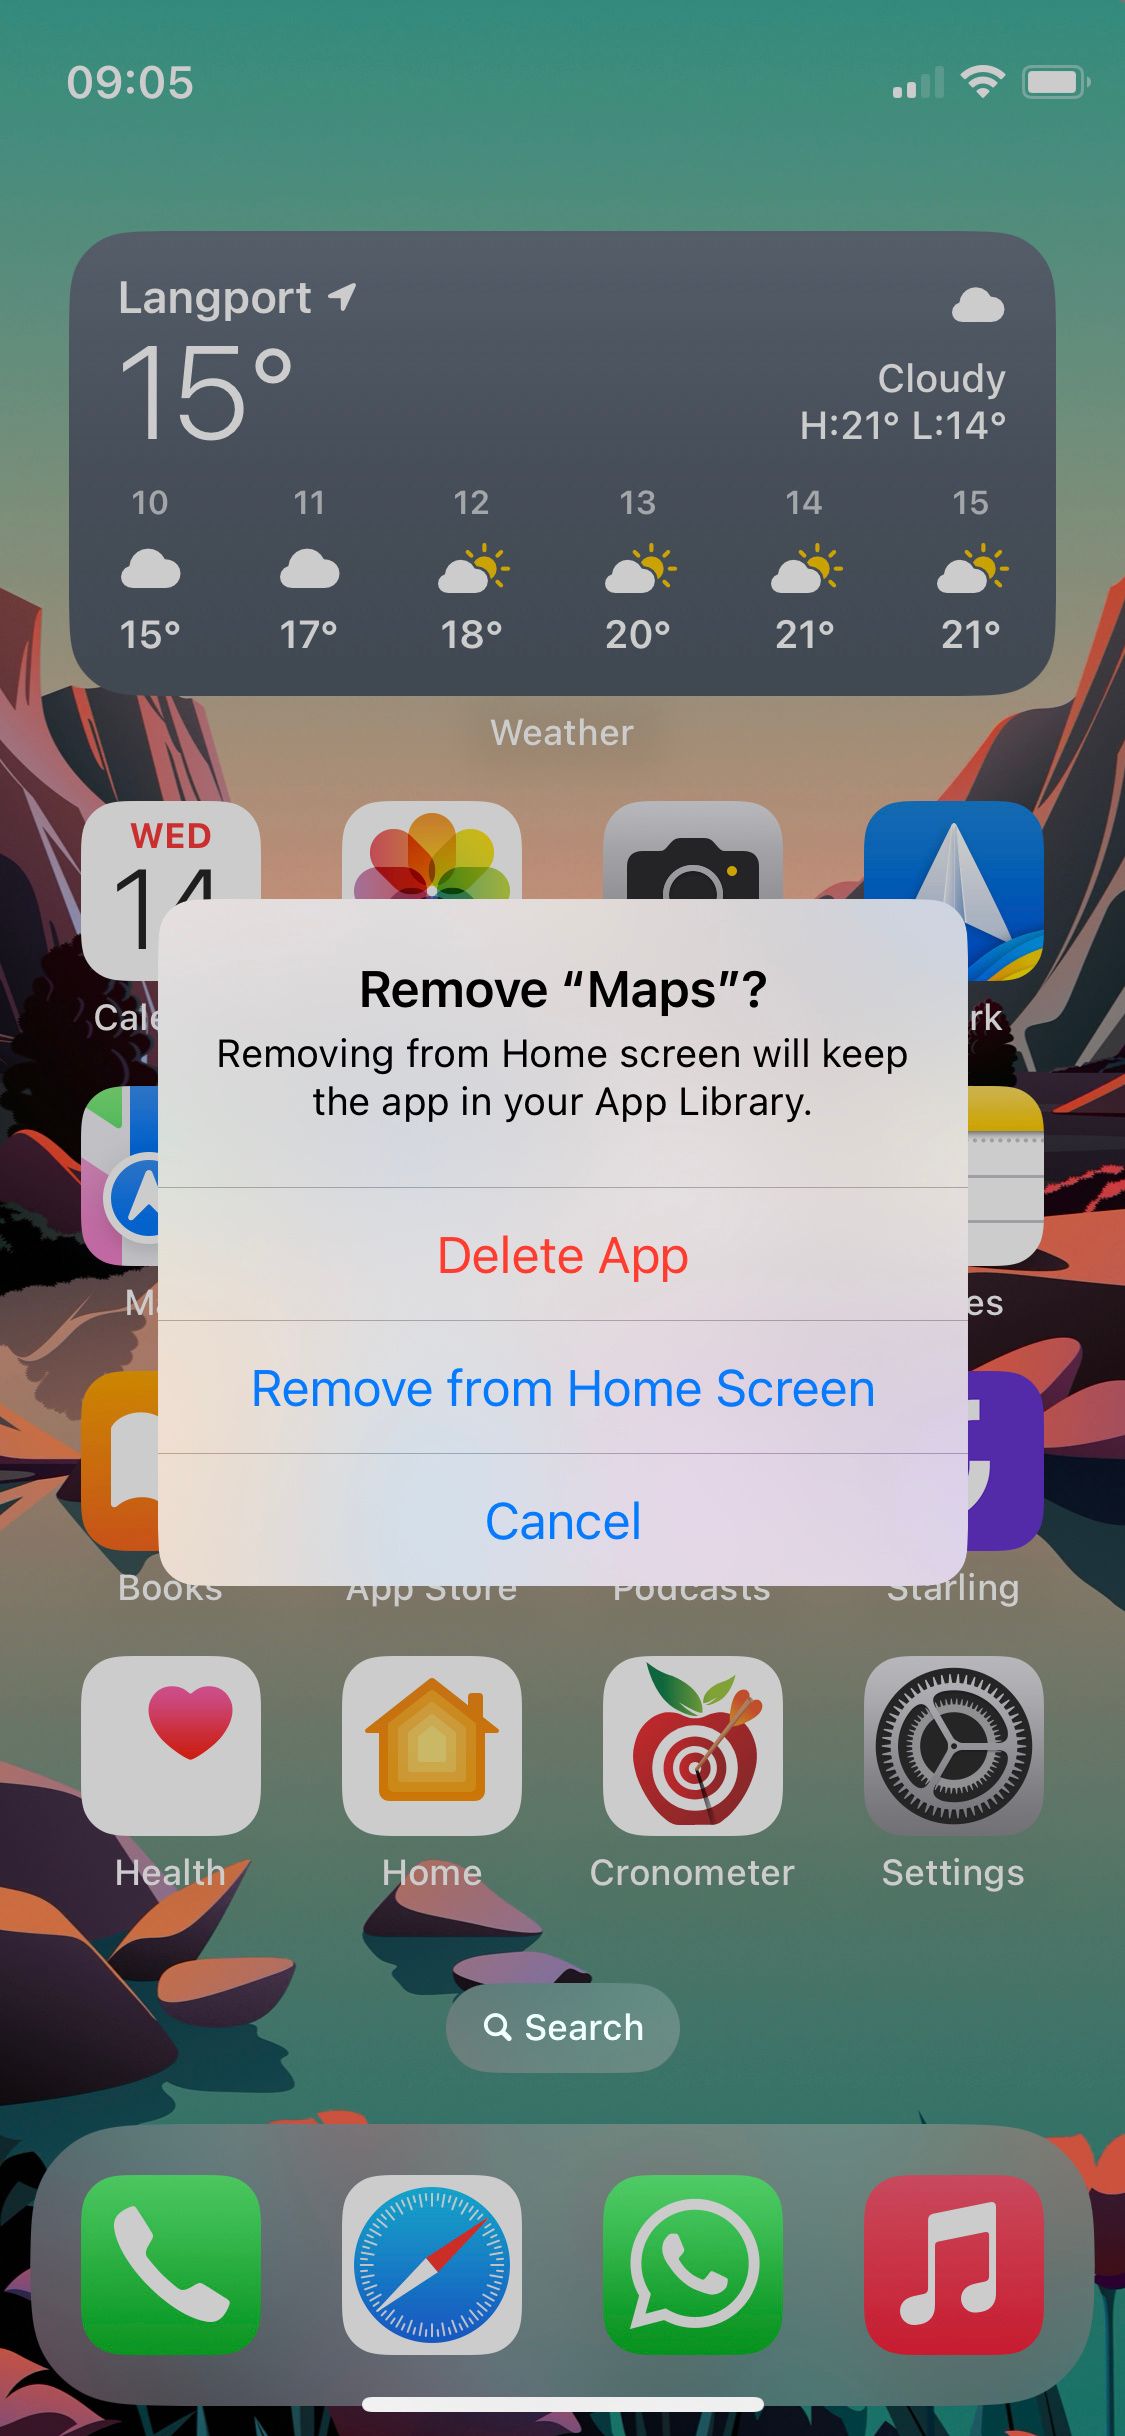 Option to Delete App from iPhone Home Screen